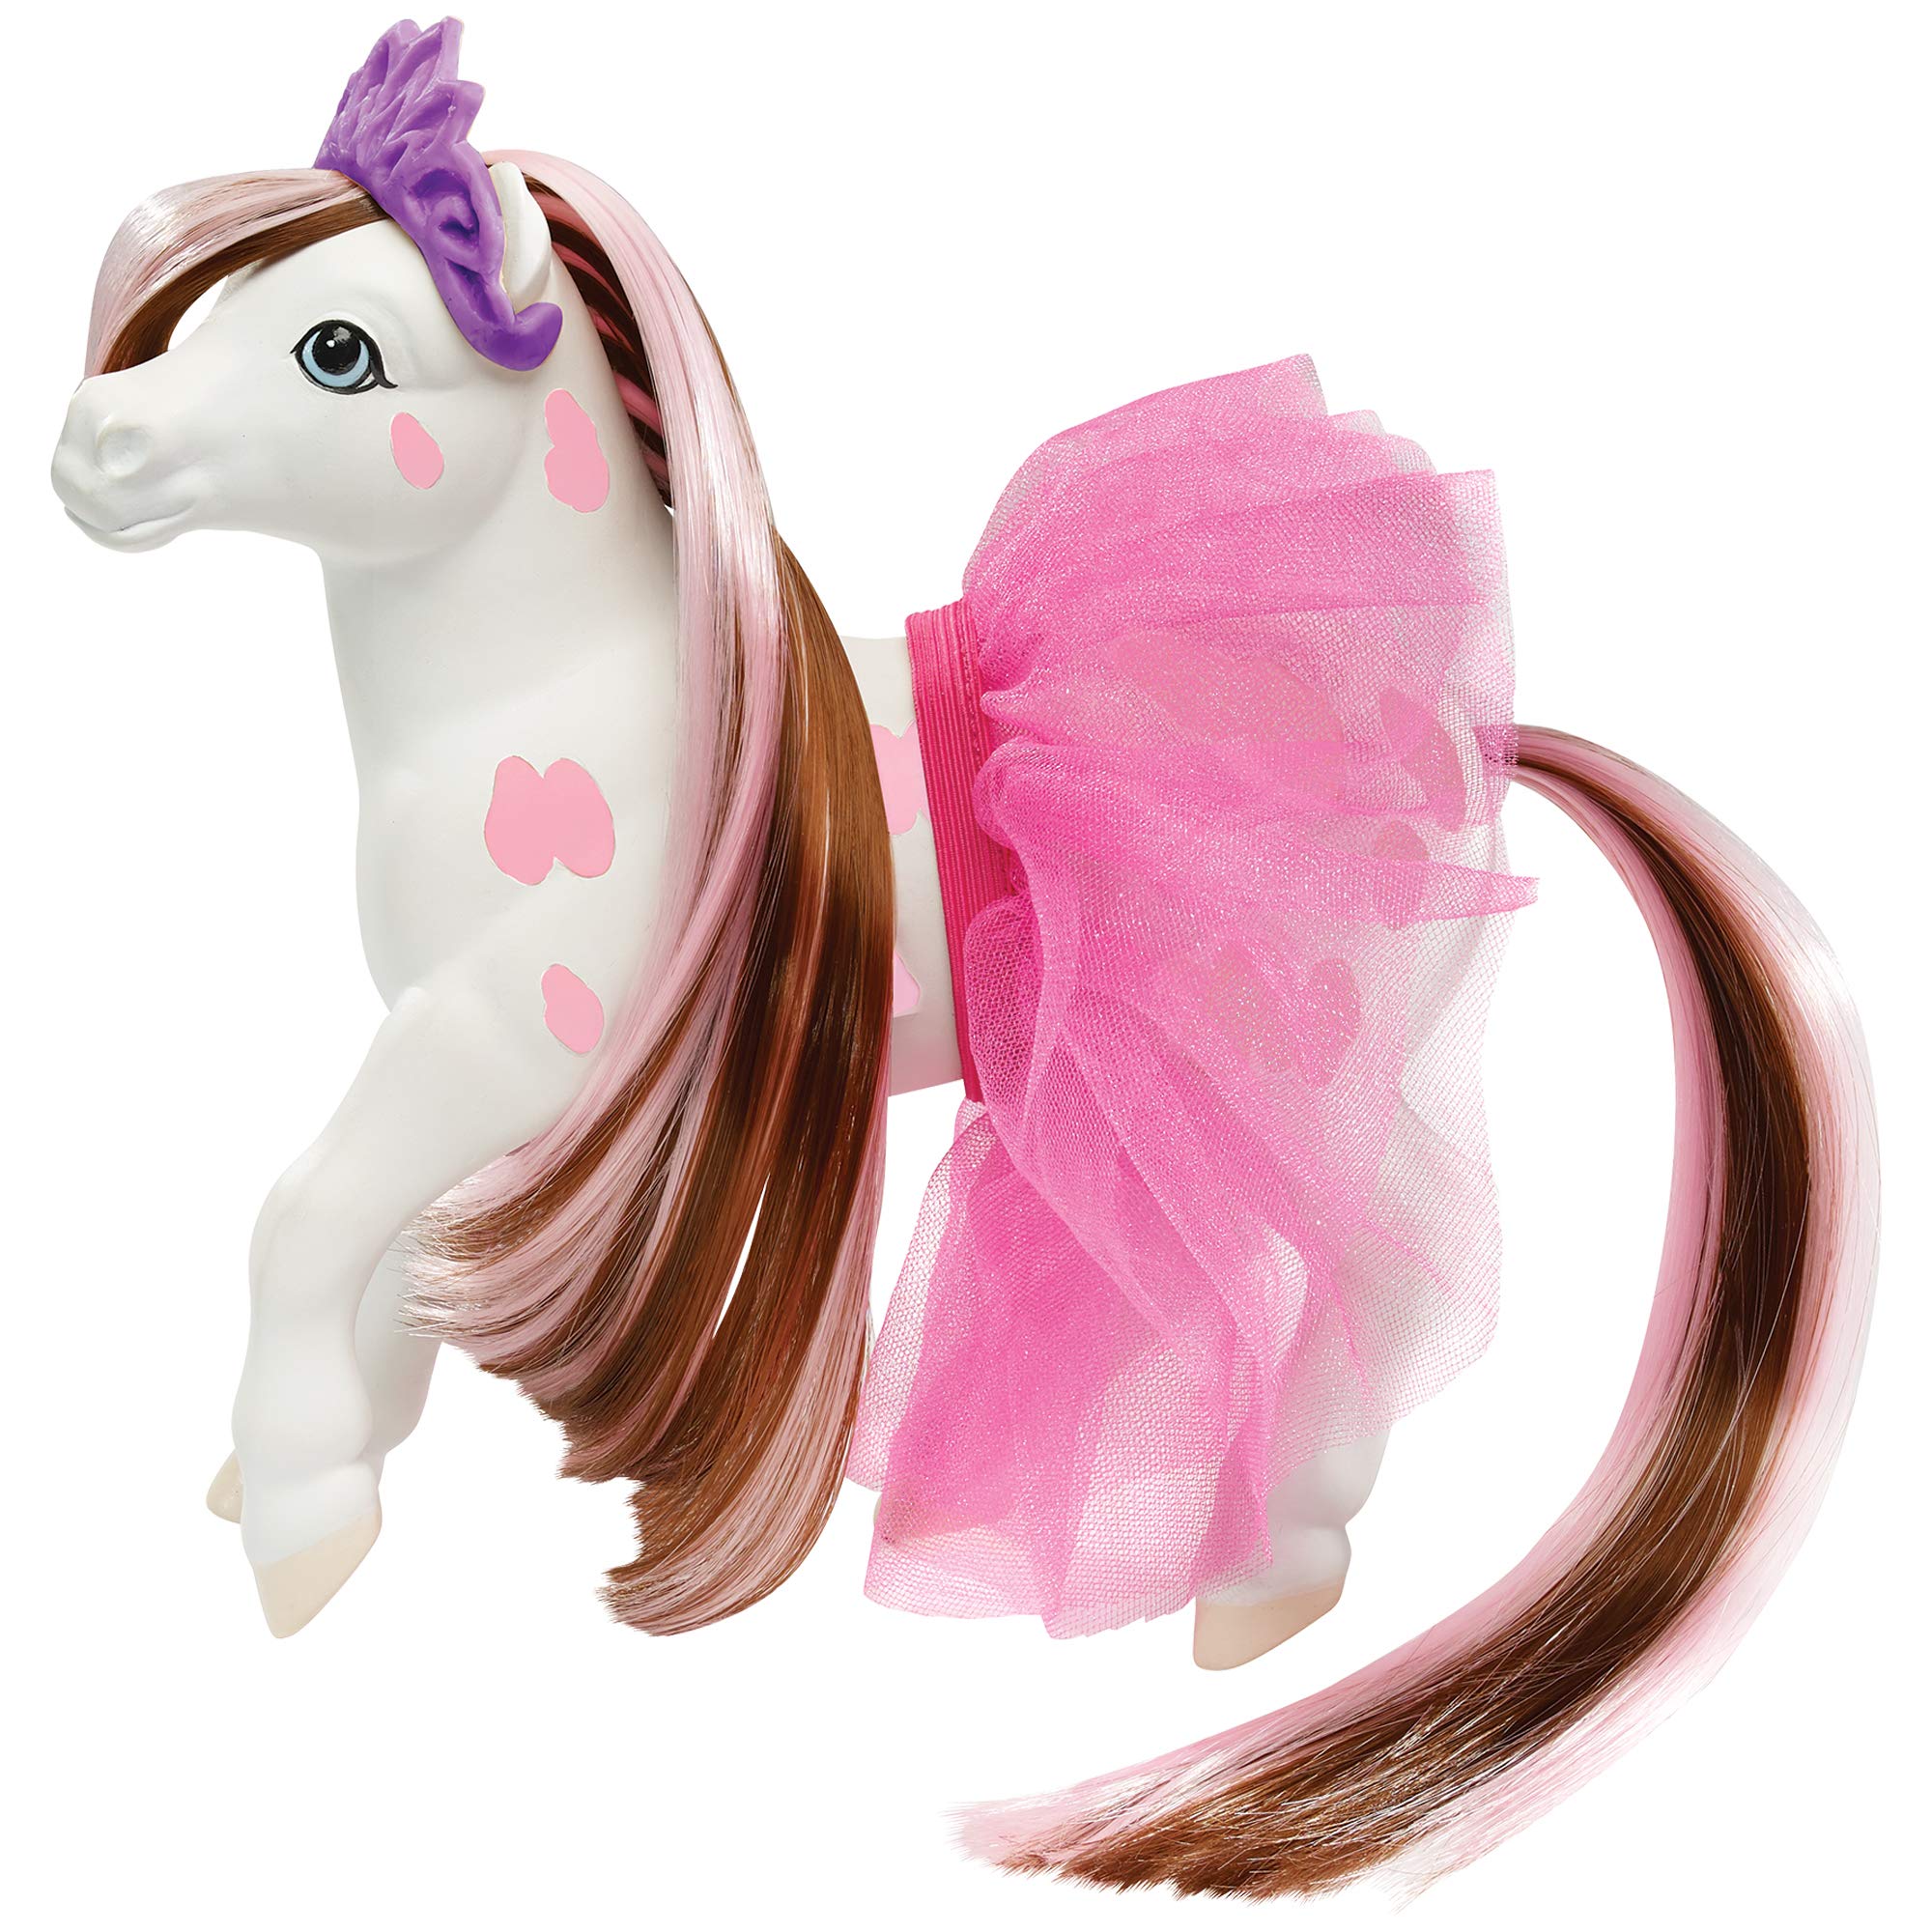 Breyer Horses Color Changing Bath Toy | Blossum The Ballerina Horse | Brown/ White with Surprise Pink Color | 7